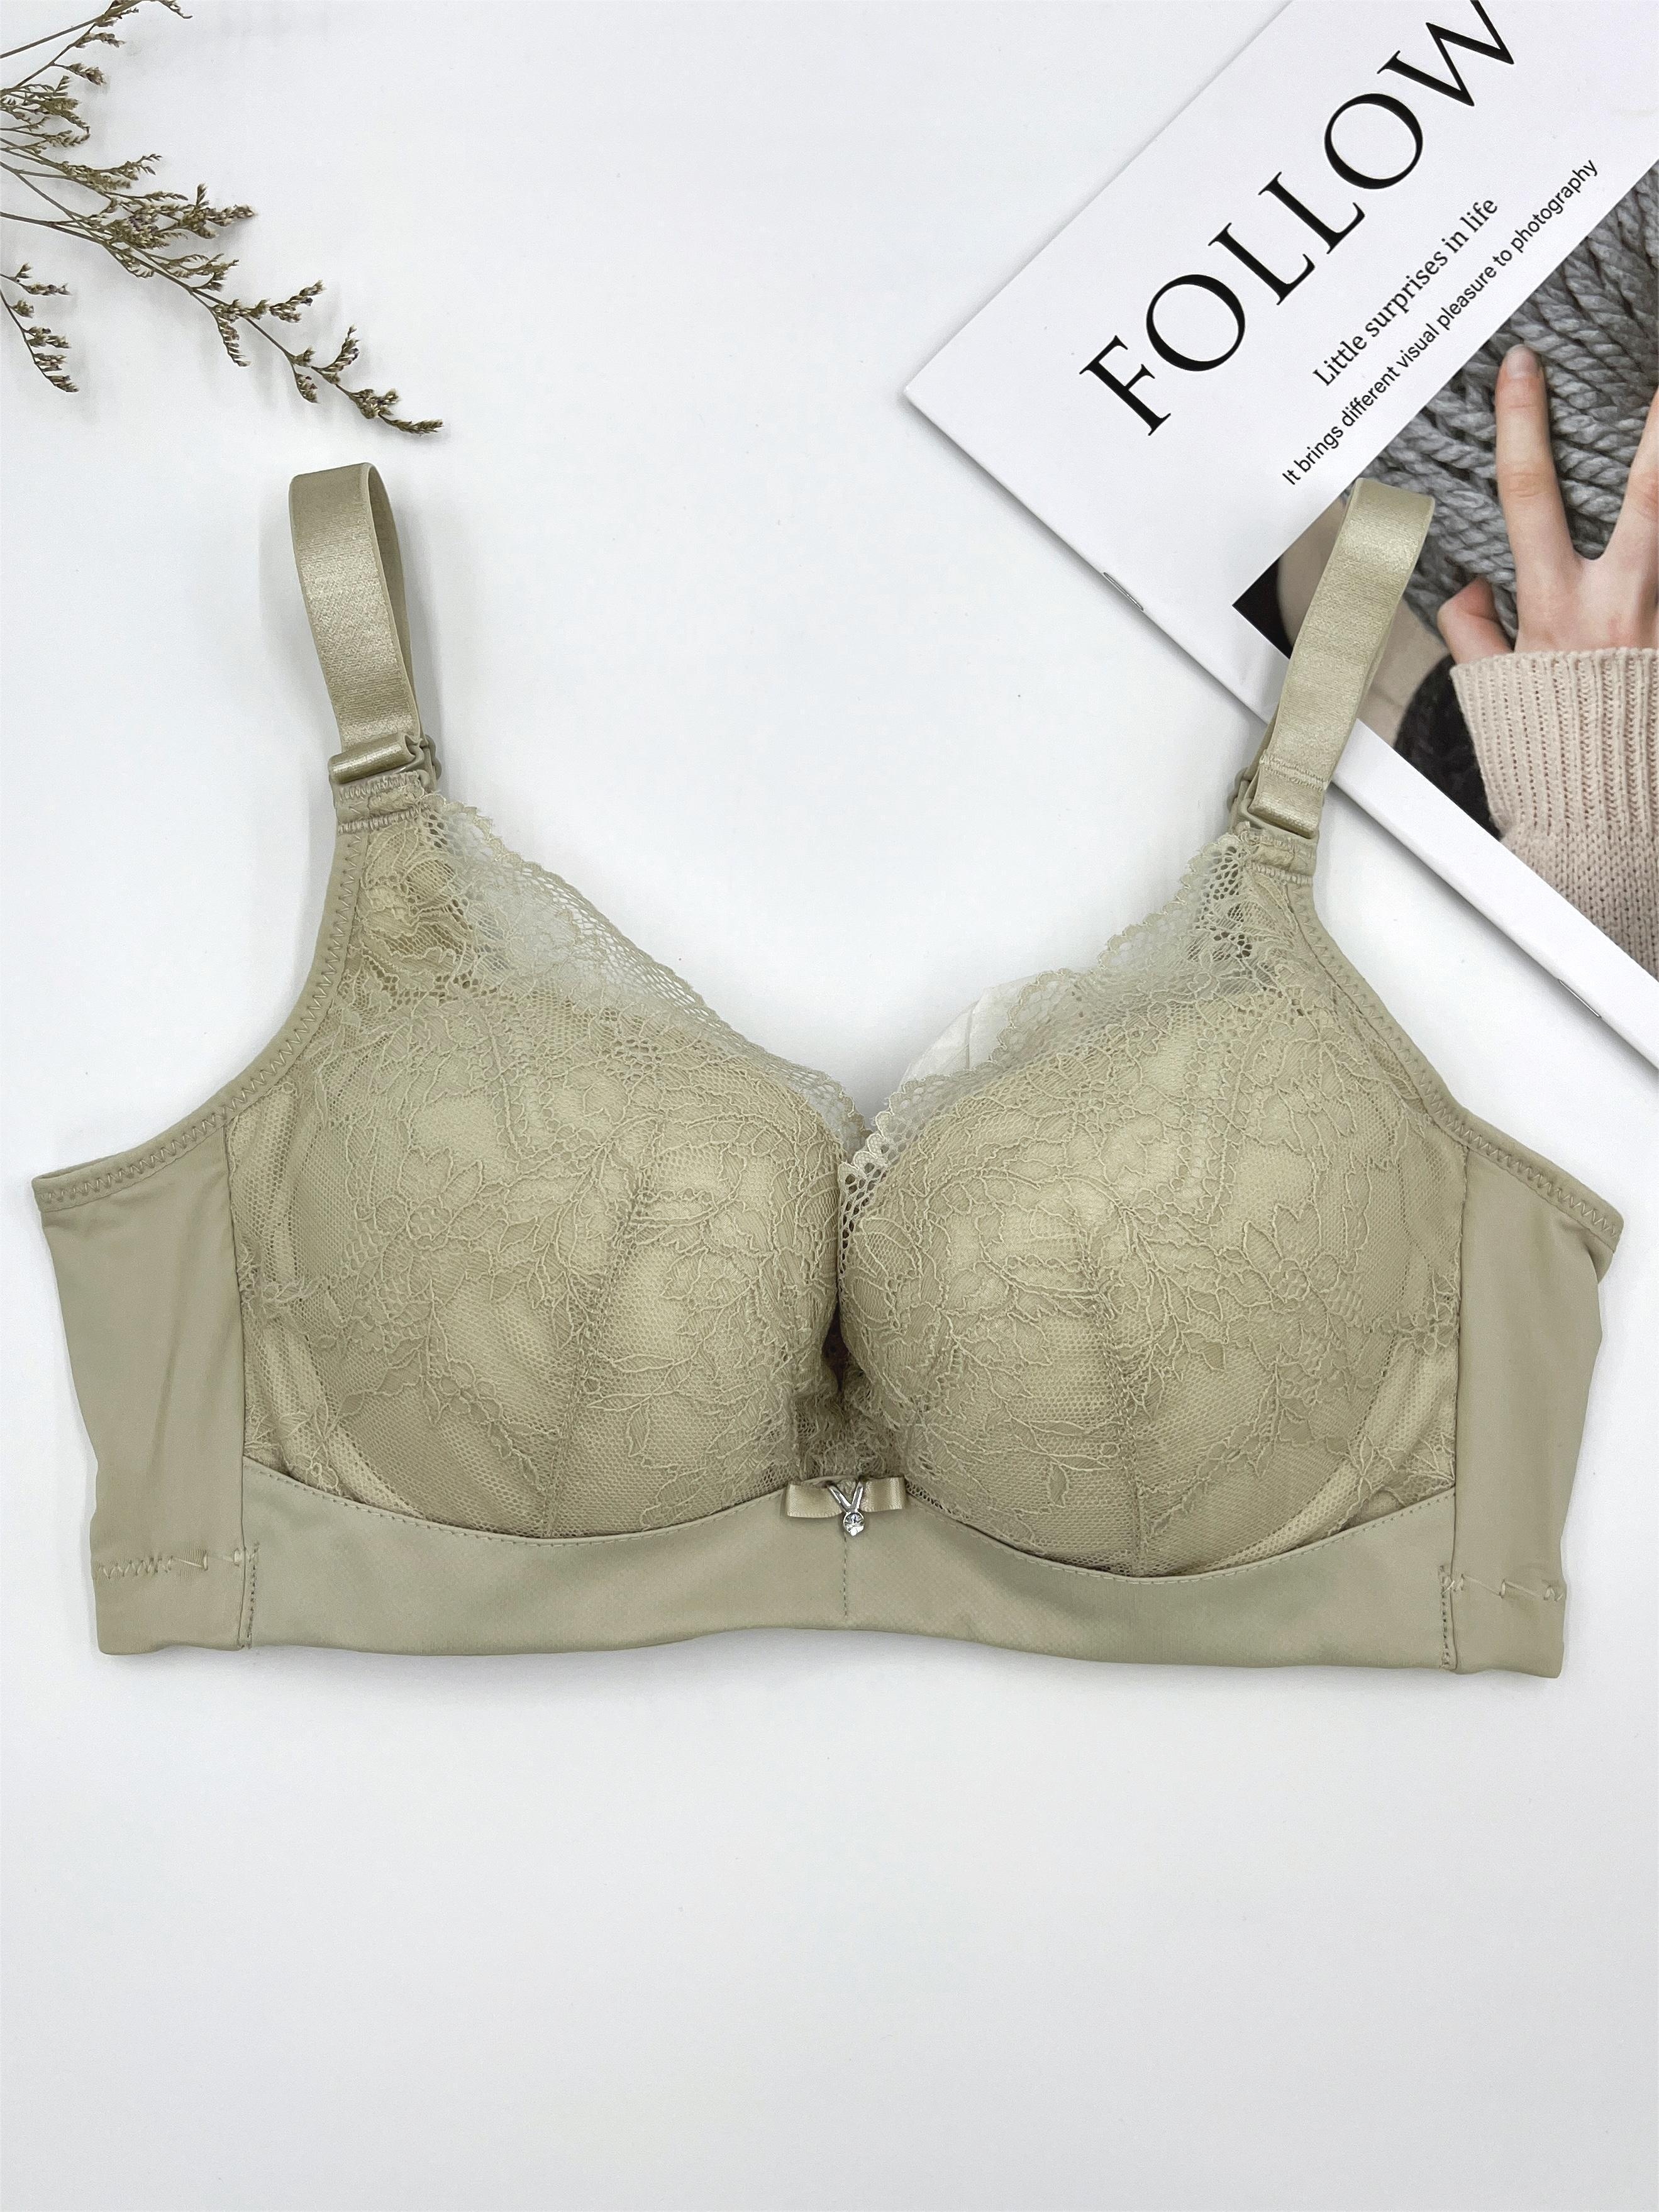 TOO BEAUTIFUL SET…2 in 1 SMOOTH TEXTURE BRA🔥FOR THAT EVERYDAY COMFORT AND  GOOD FEELING👍 BRAND:🇬🇧 PRICE: #DISCOUNTED SIZE